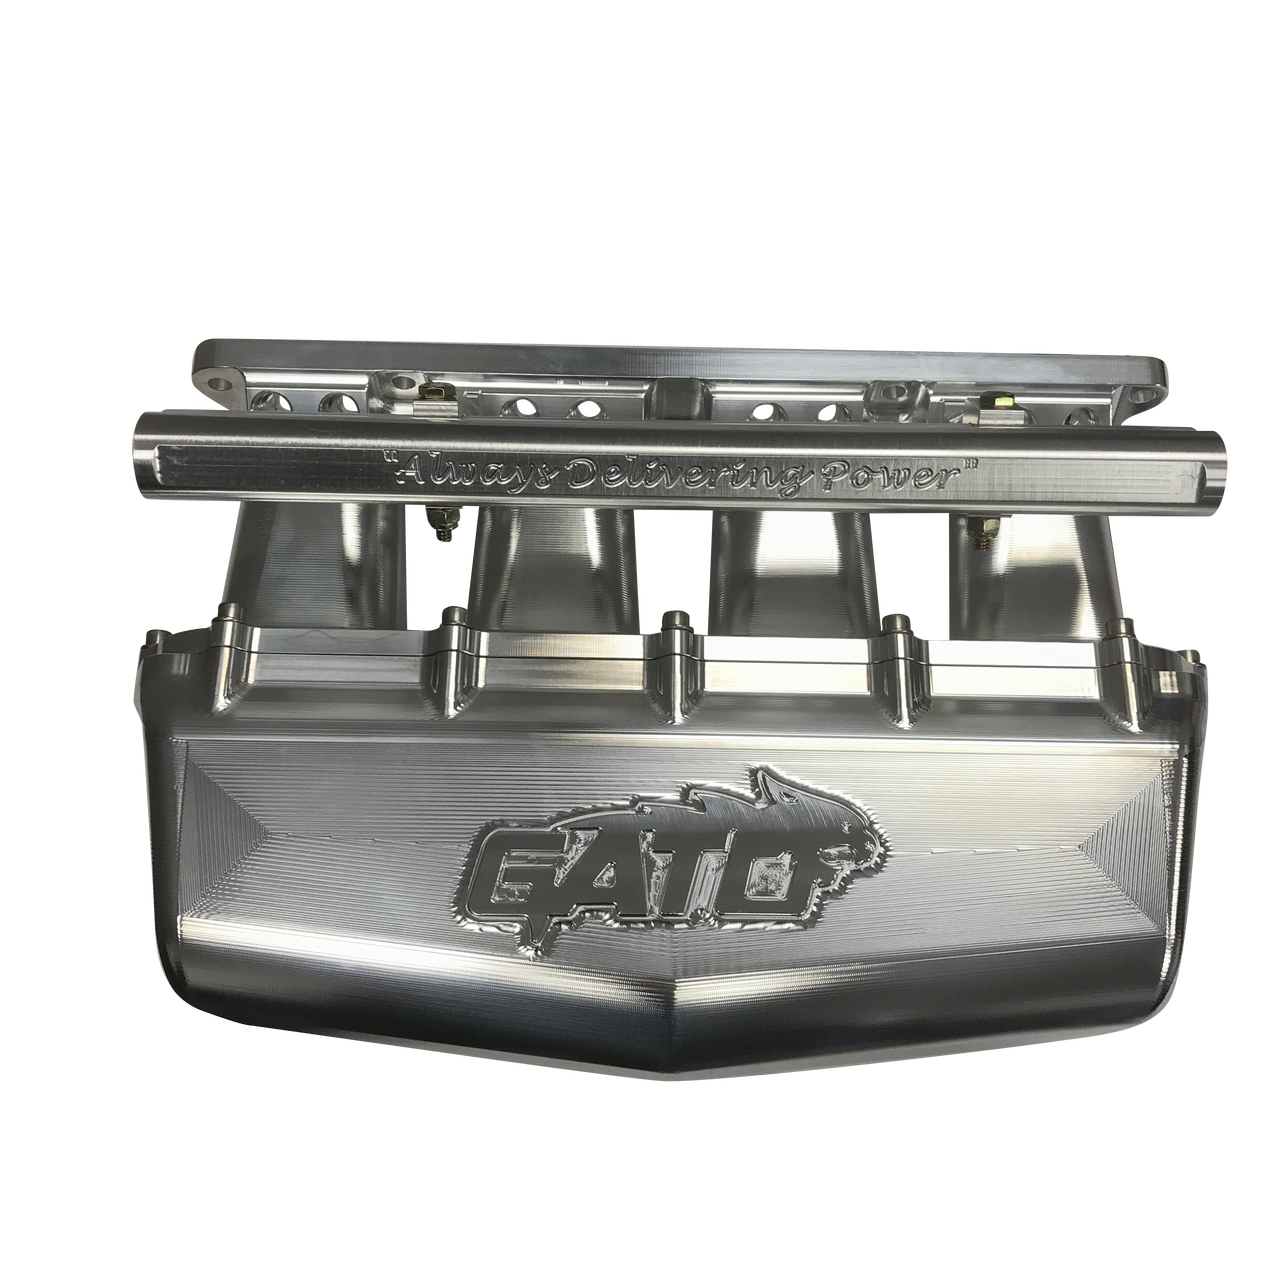 Gato Performance - Billet Intake Manifold (Center Feed or Side Feed)